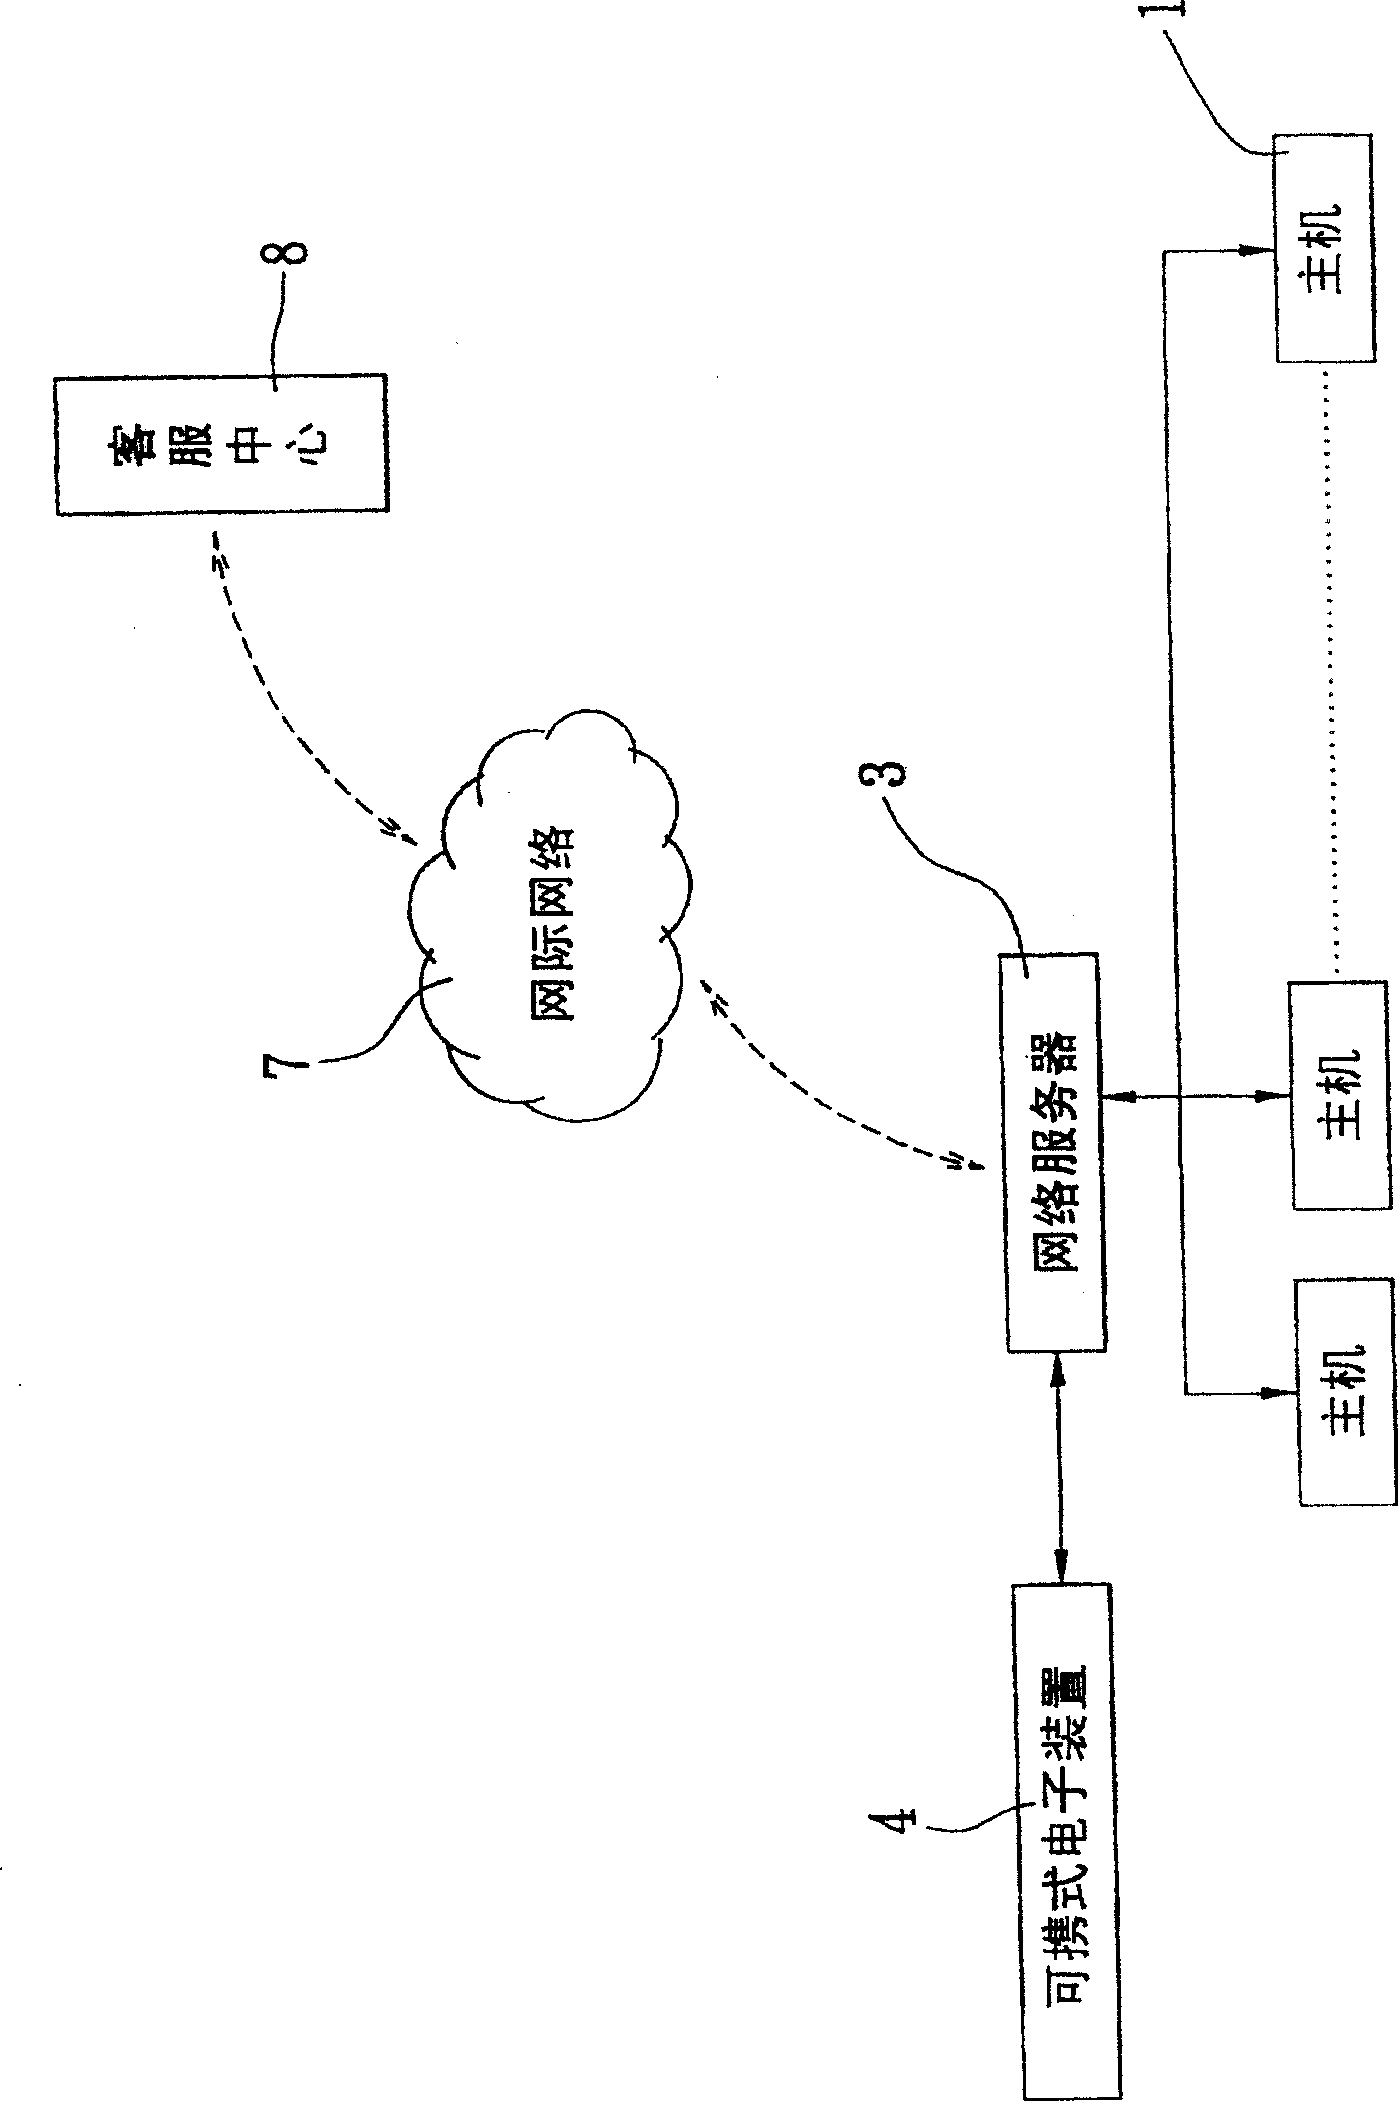 Mobile information system for means of conveyance